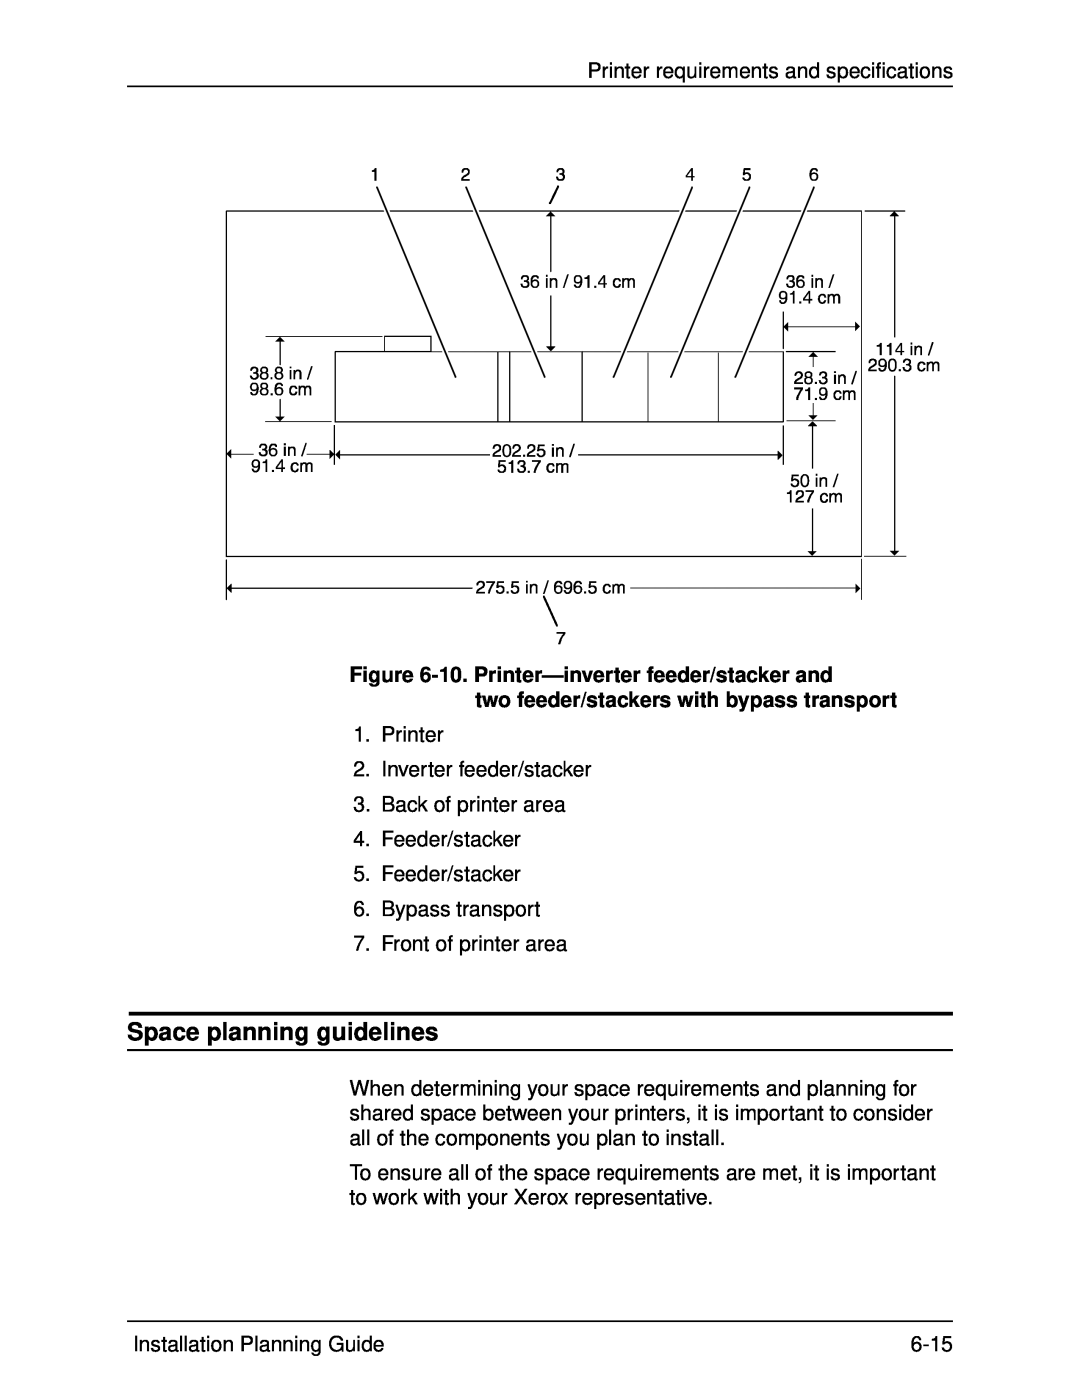 Xerox 115 Space planning guidelines, 10. Printer-inverter feeder/stacker and, two feeder/stackers with bypass transport 